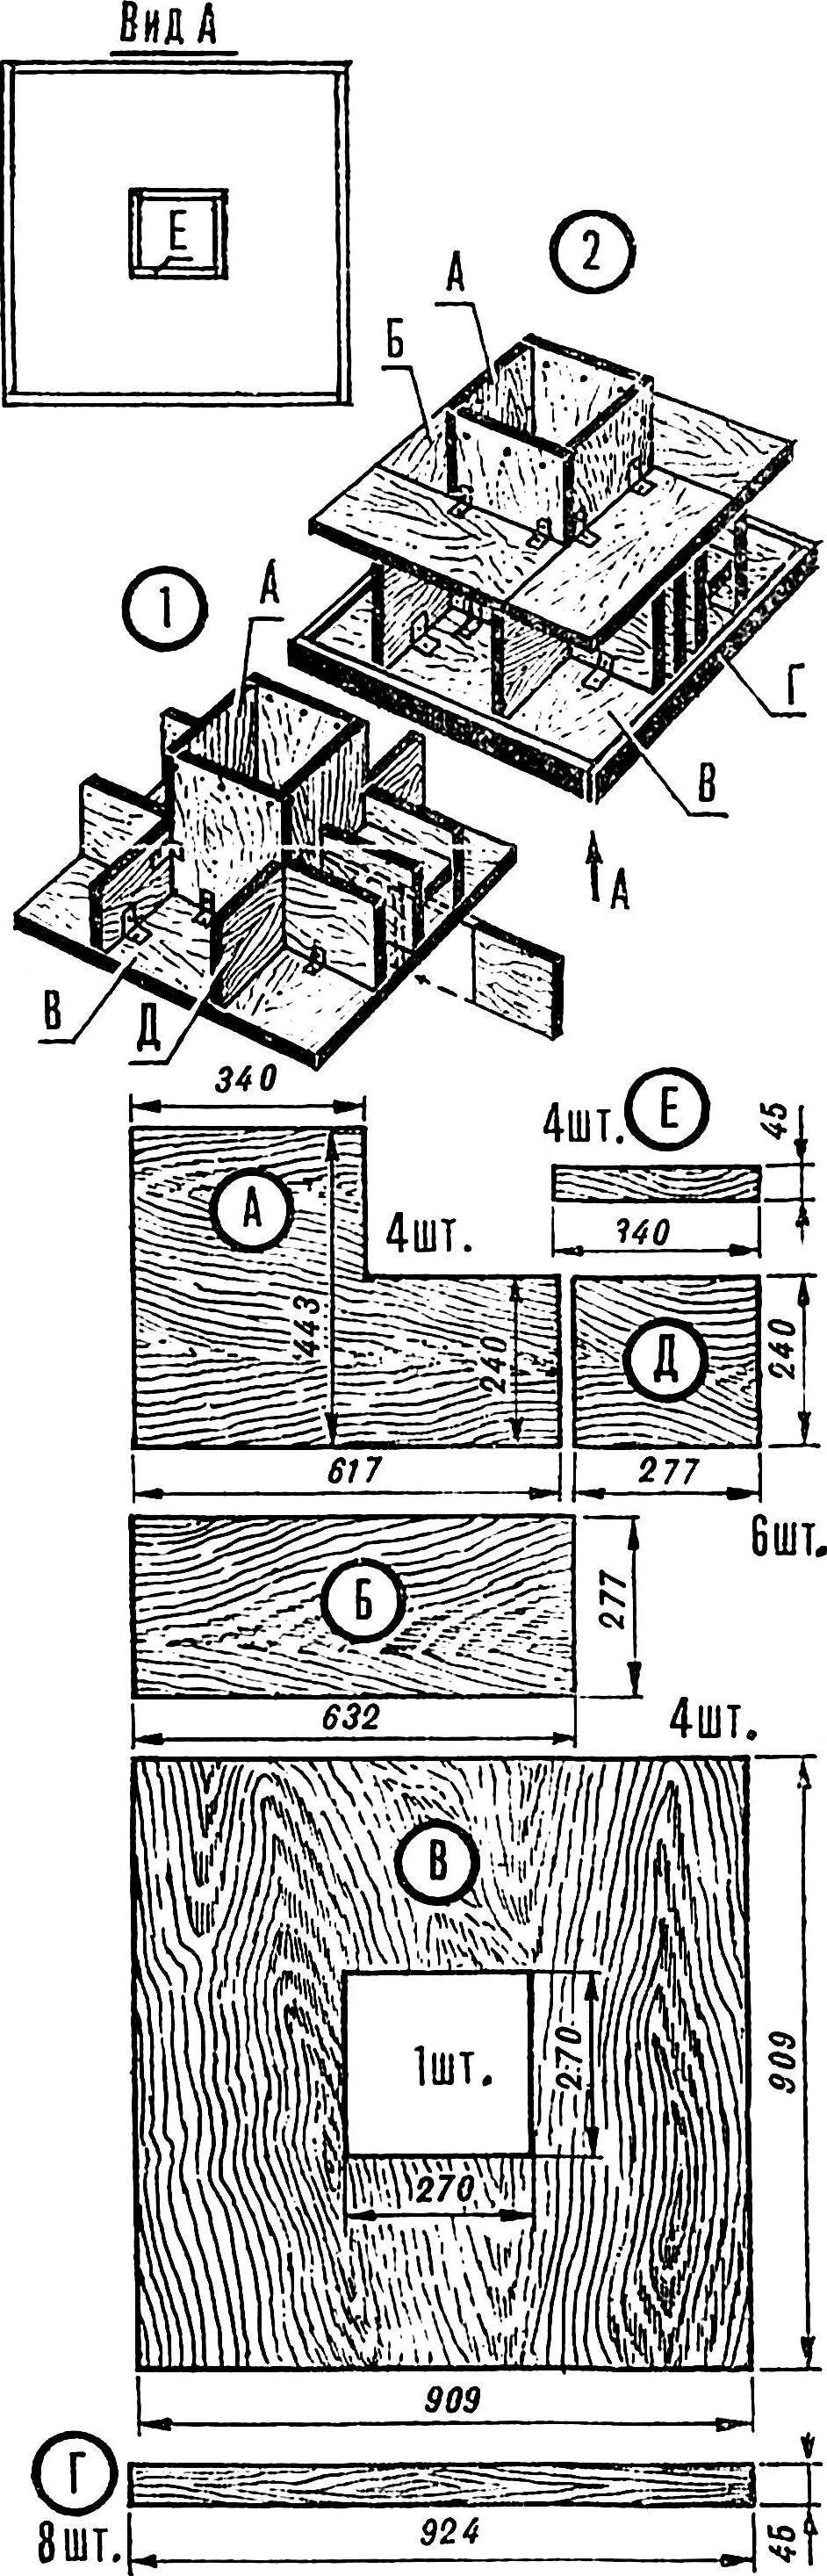 Fig. 2. Assembly sequence and details of the mezzanine.